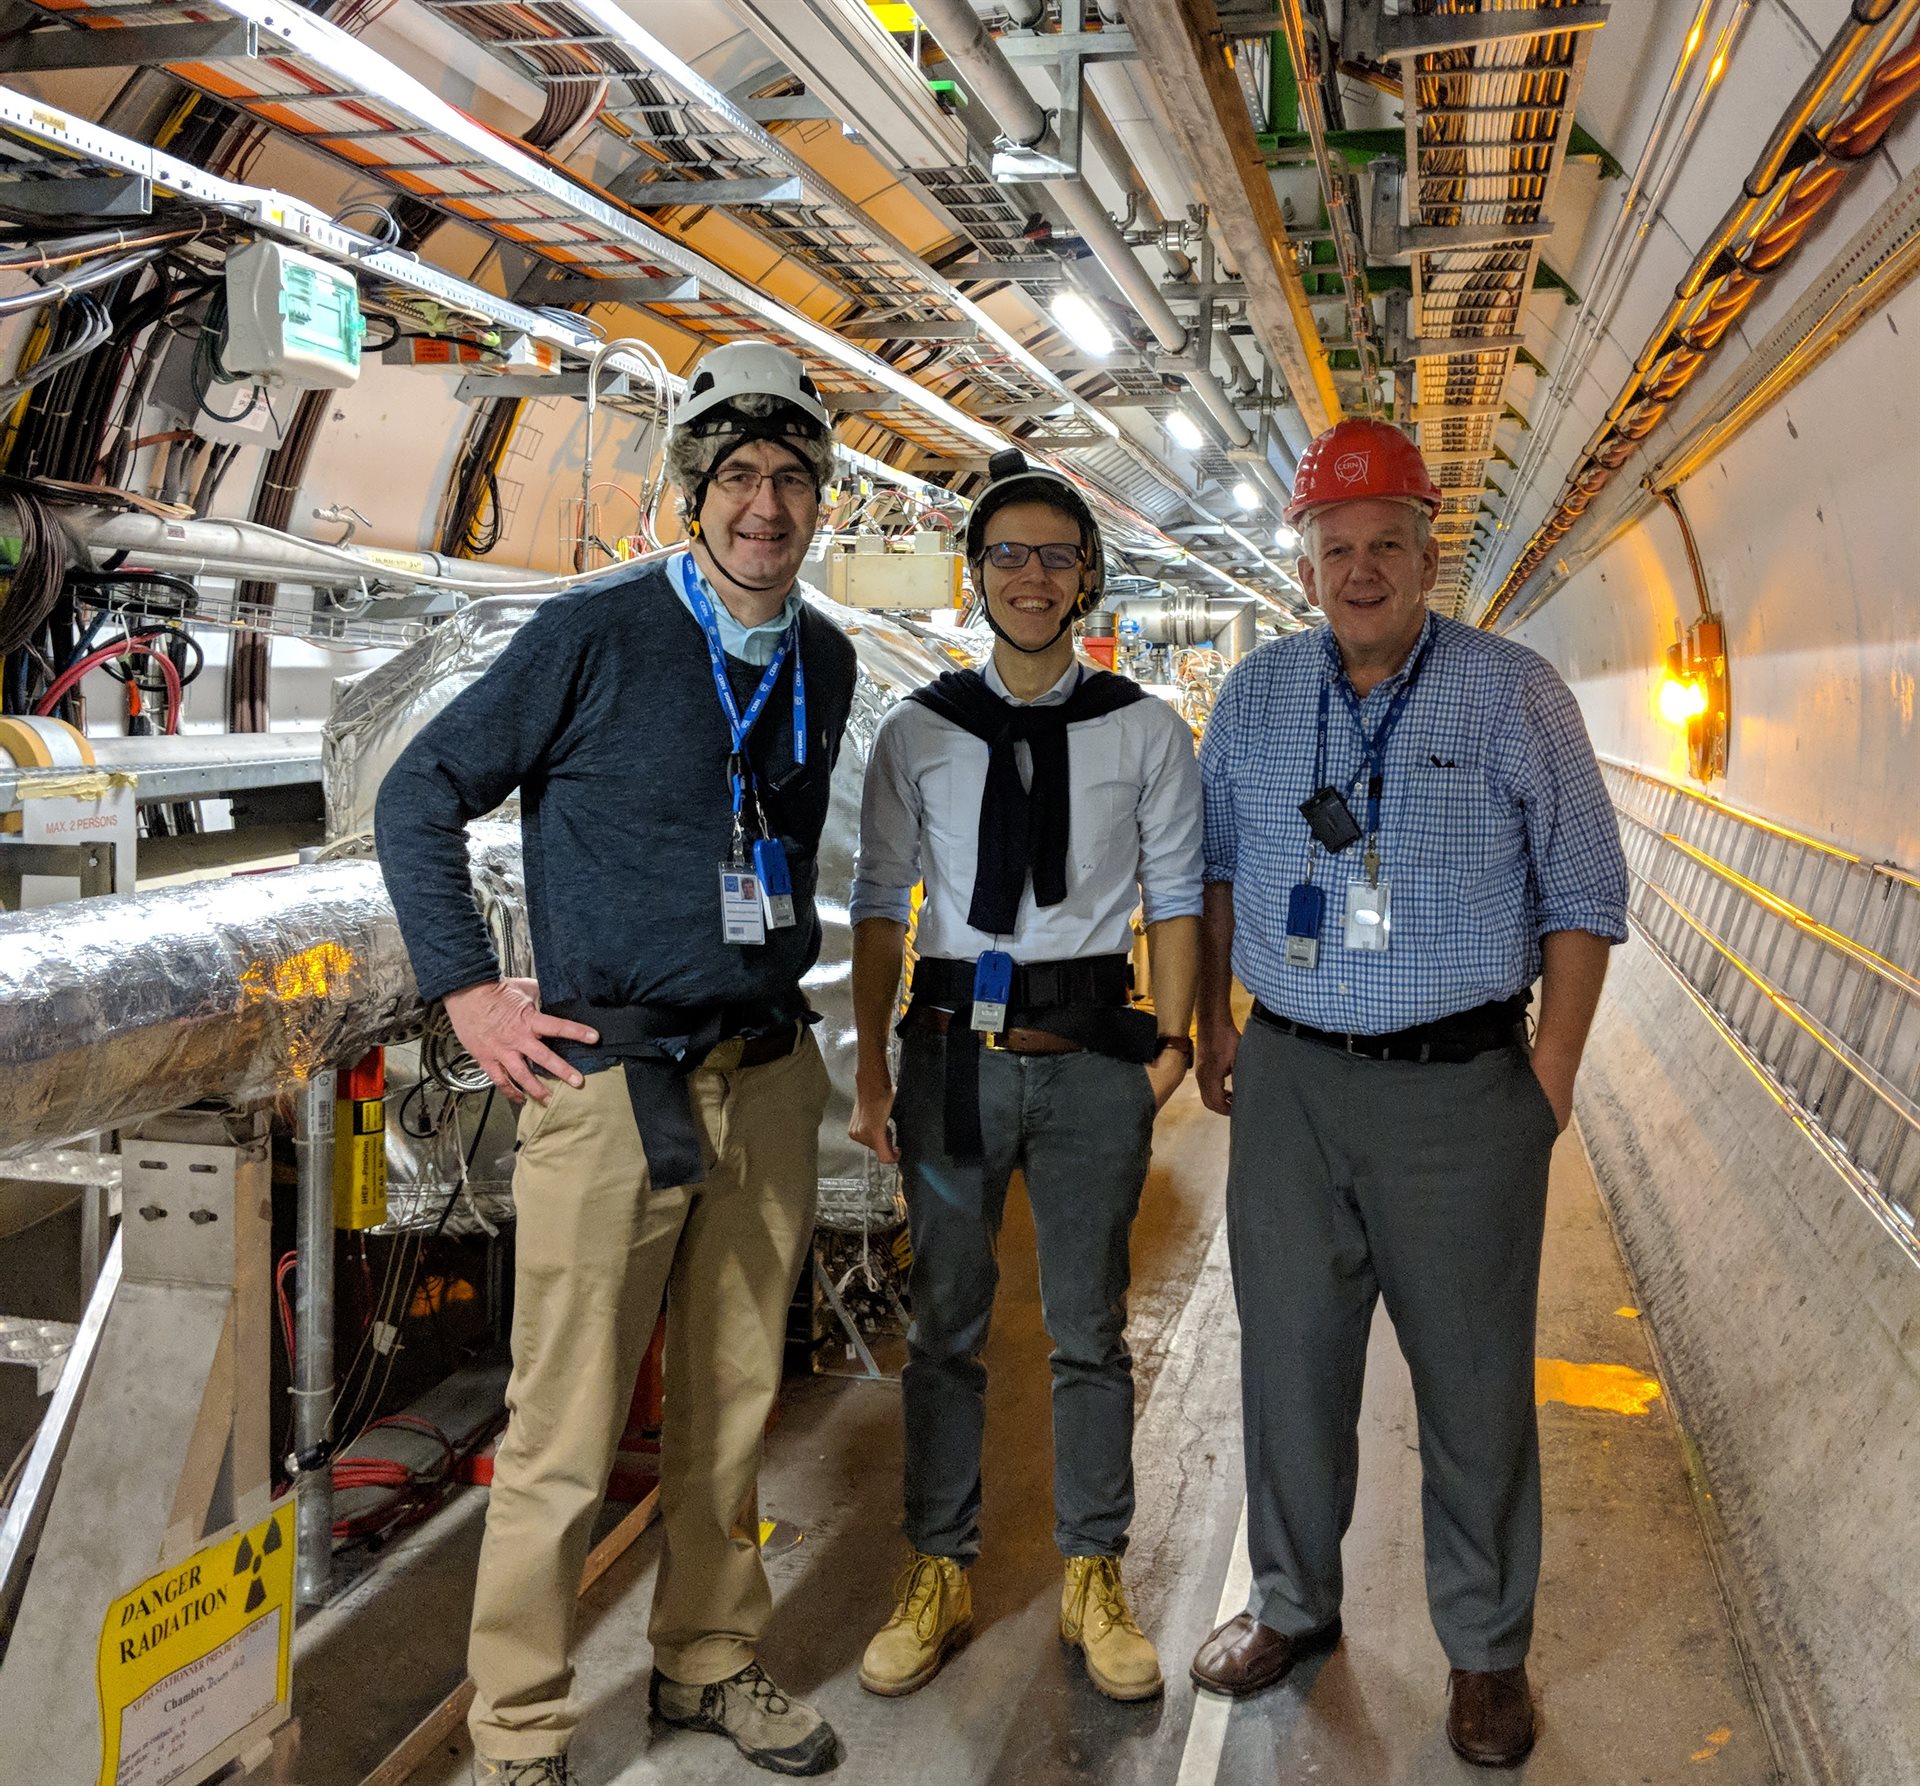 Pictured left to right, University of Kansas Physics &amp;amp;amp; Astronomy Professor Michael Murray, Illinois Physics Research Scientist Riccardo Longo, and Illinois Physics Professor Matthias Grosse Perdekamp pose for a photo at the Large Hadron Collider at CERN. Photo courtesy of Matthias Grosse Perdekamp, Illinois Physics.